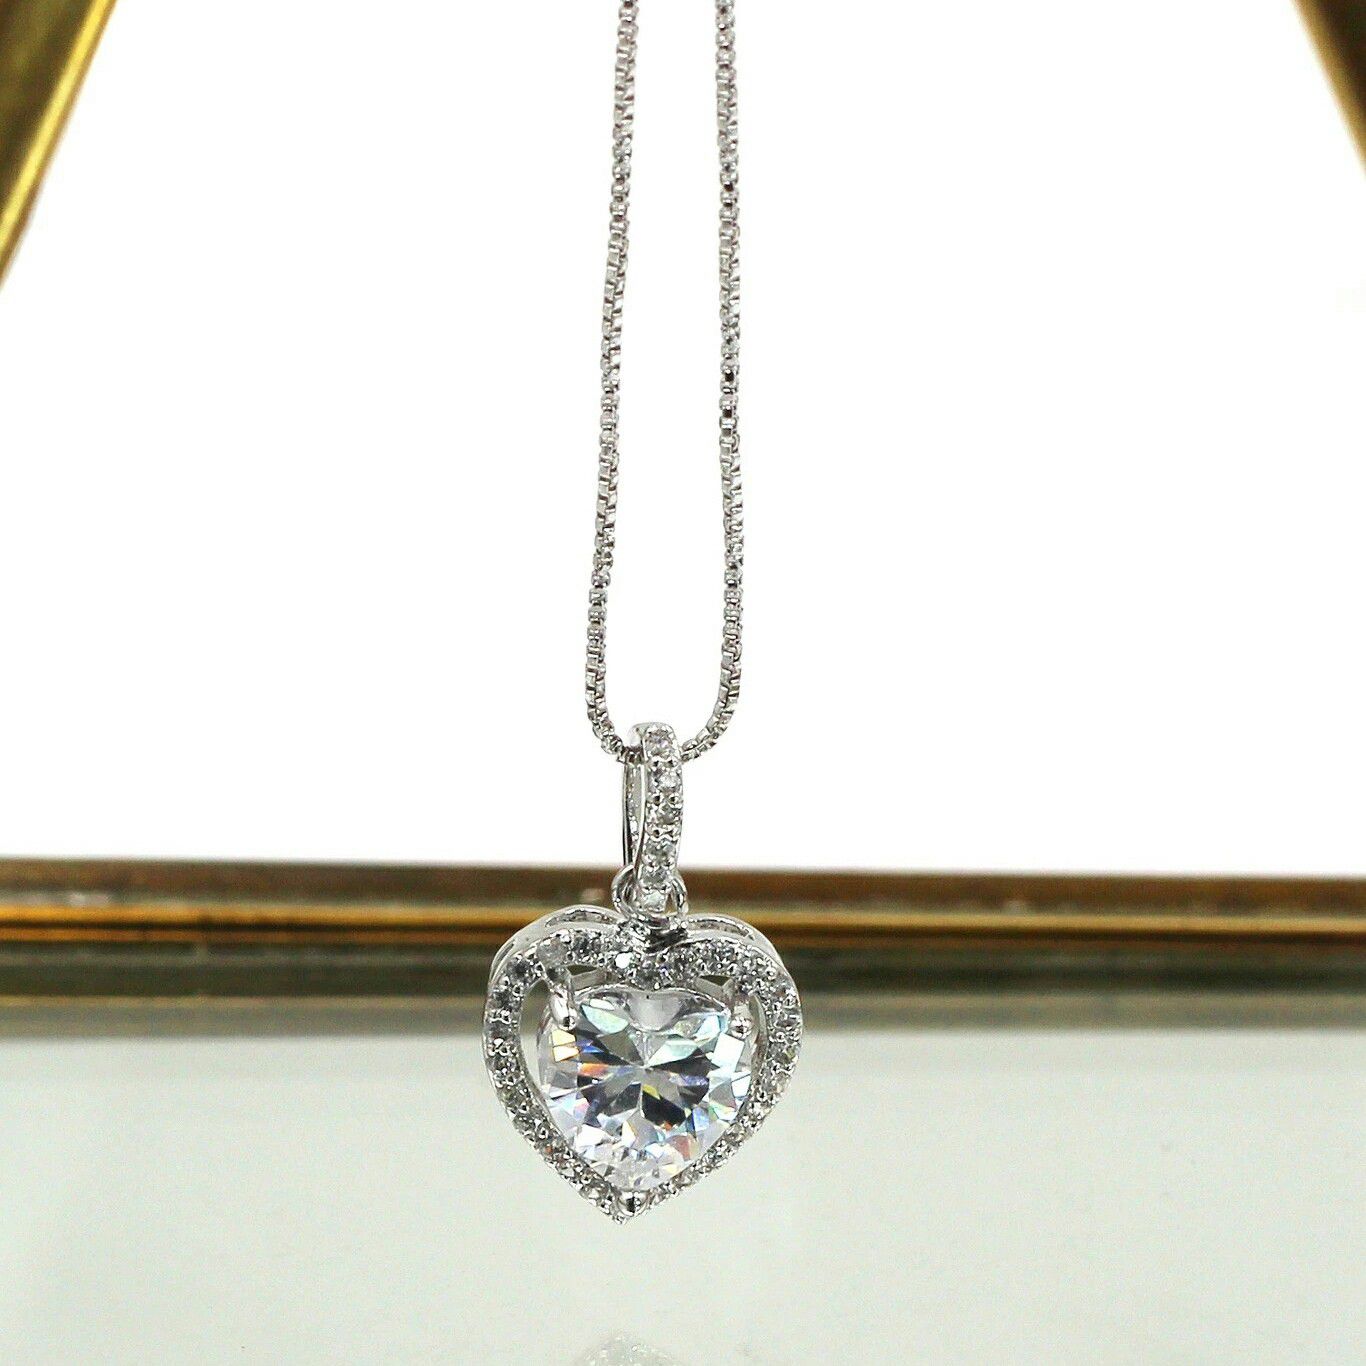 Lovely silver peach heart crystal necklace